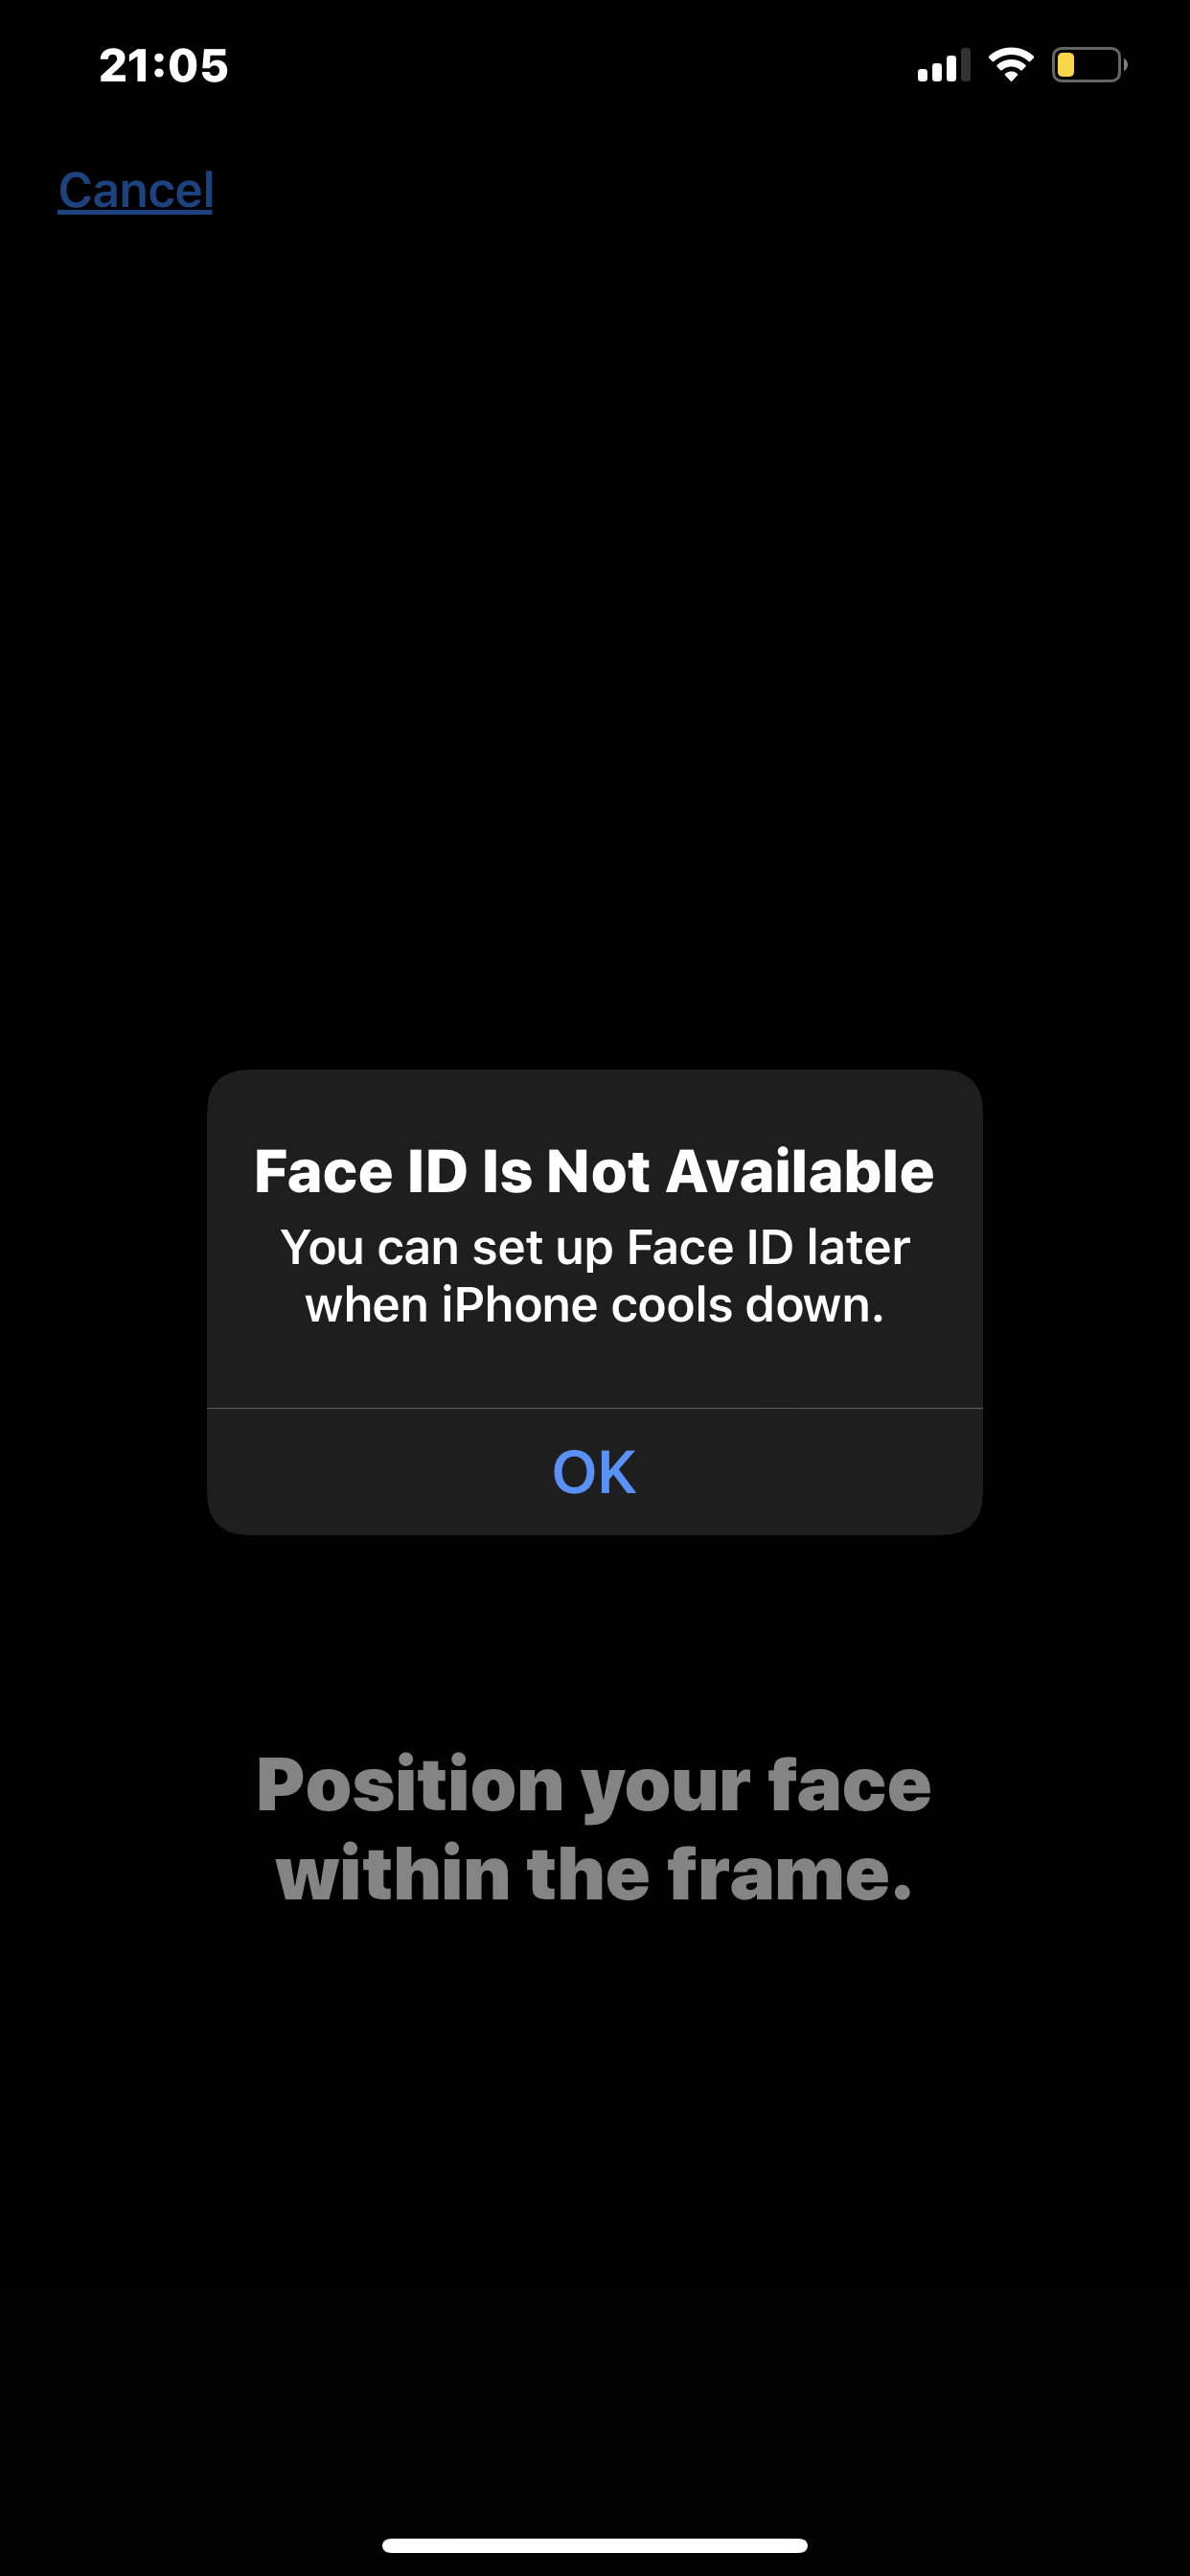 face id not working - Apple Community